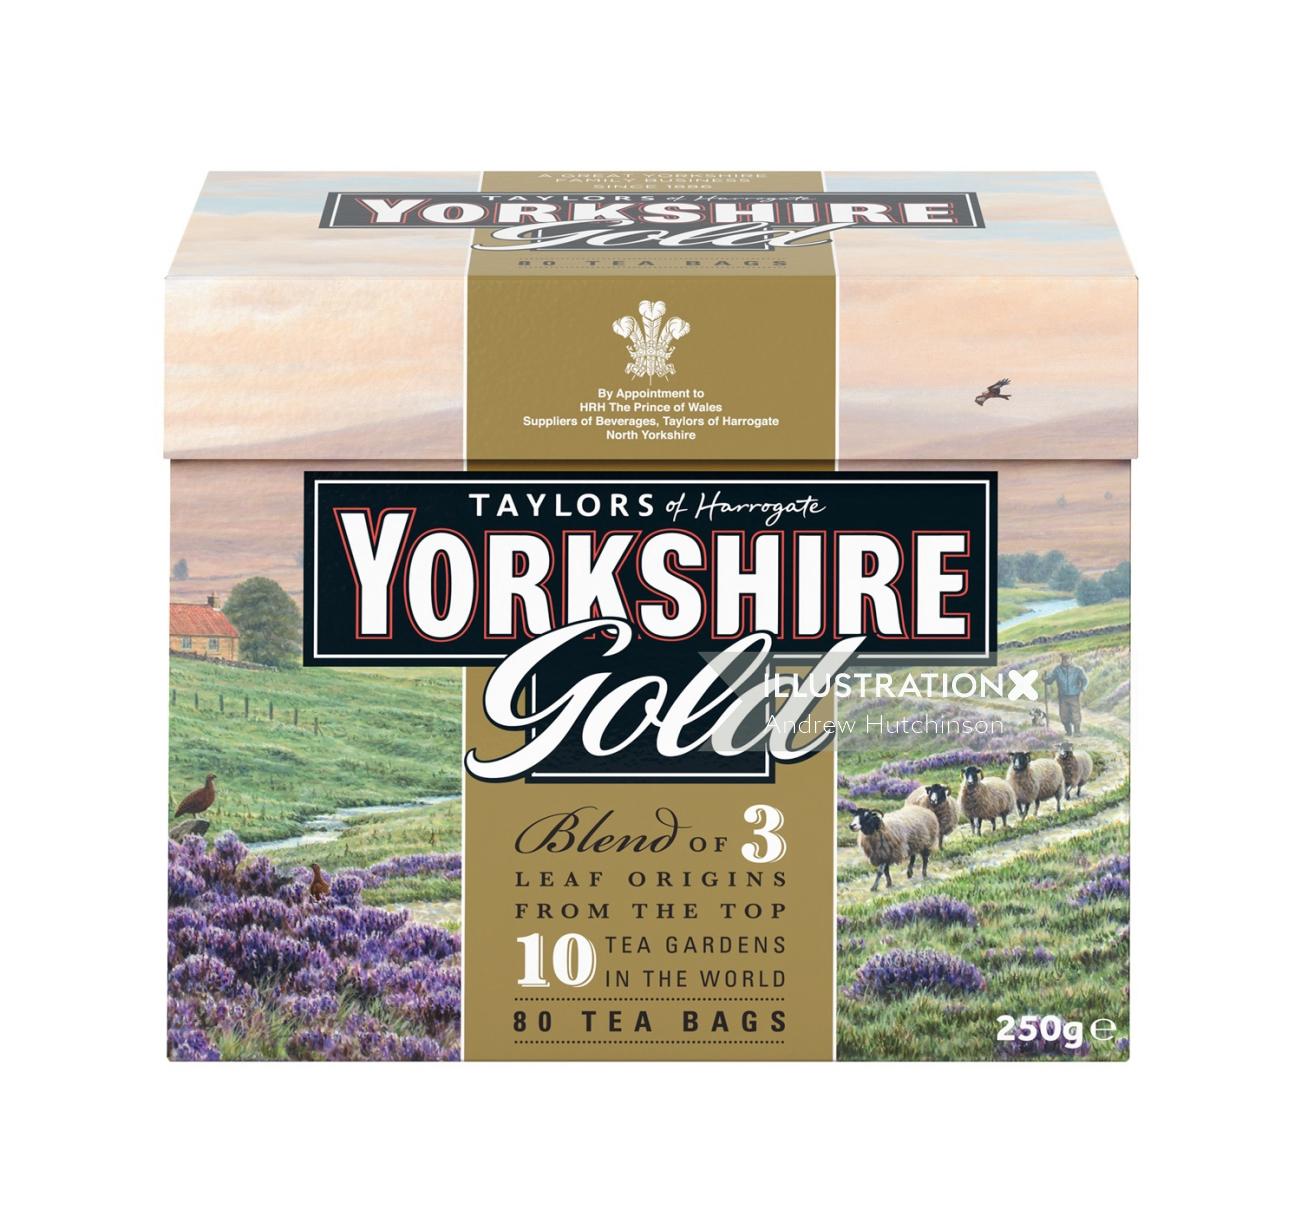 Labeling for Yorkshire Gold by Taylors of Harrogate